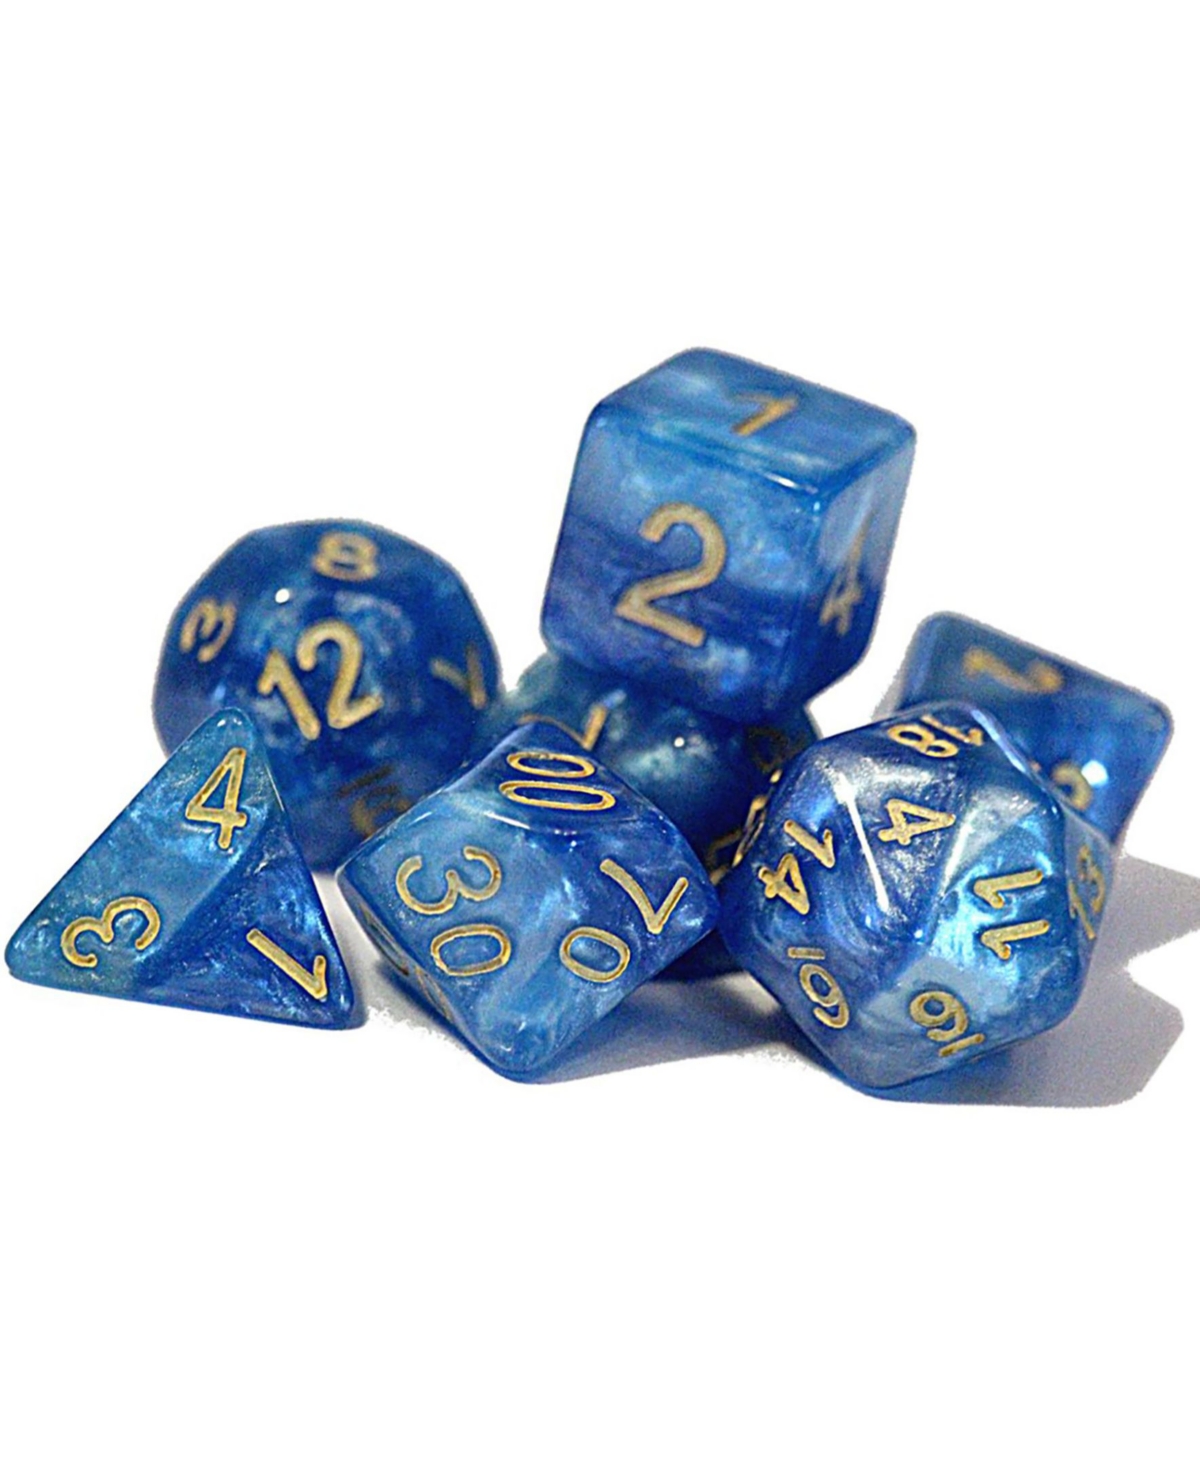 Flat River Group Sky Current Halfsies Dice Layered Dice With Upgraded Dice Case, 7 Piece In Multi